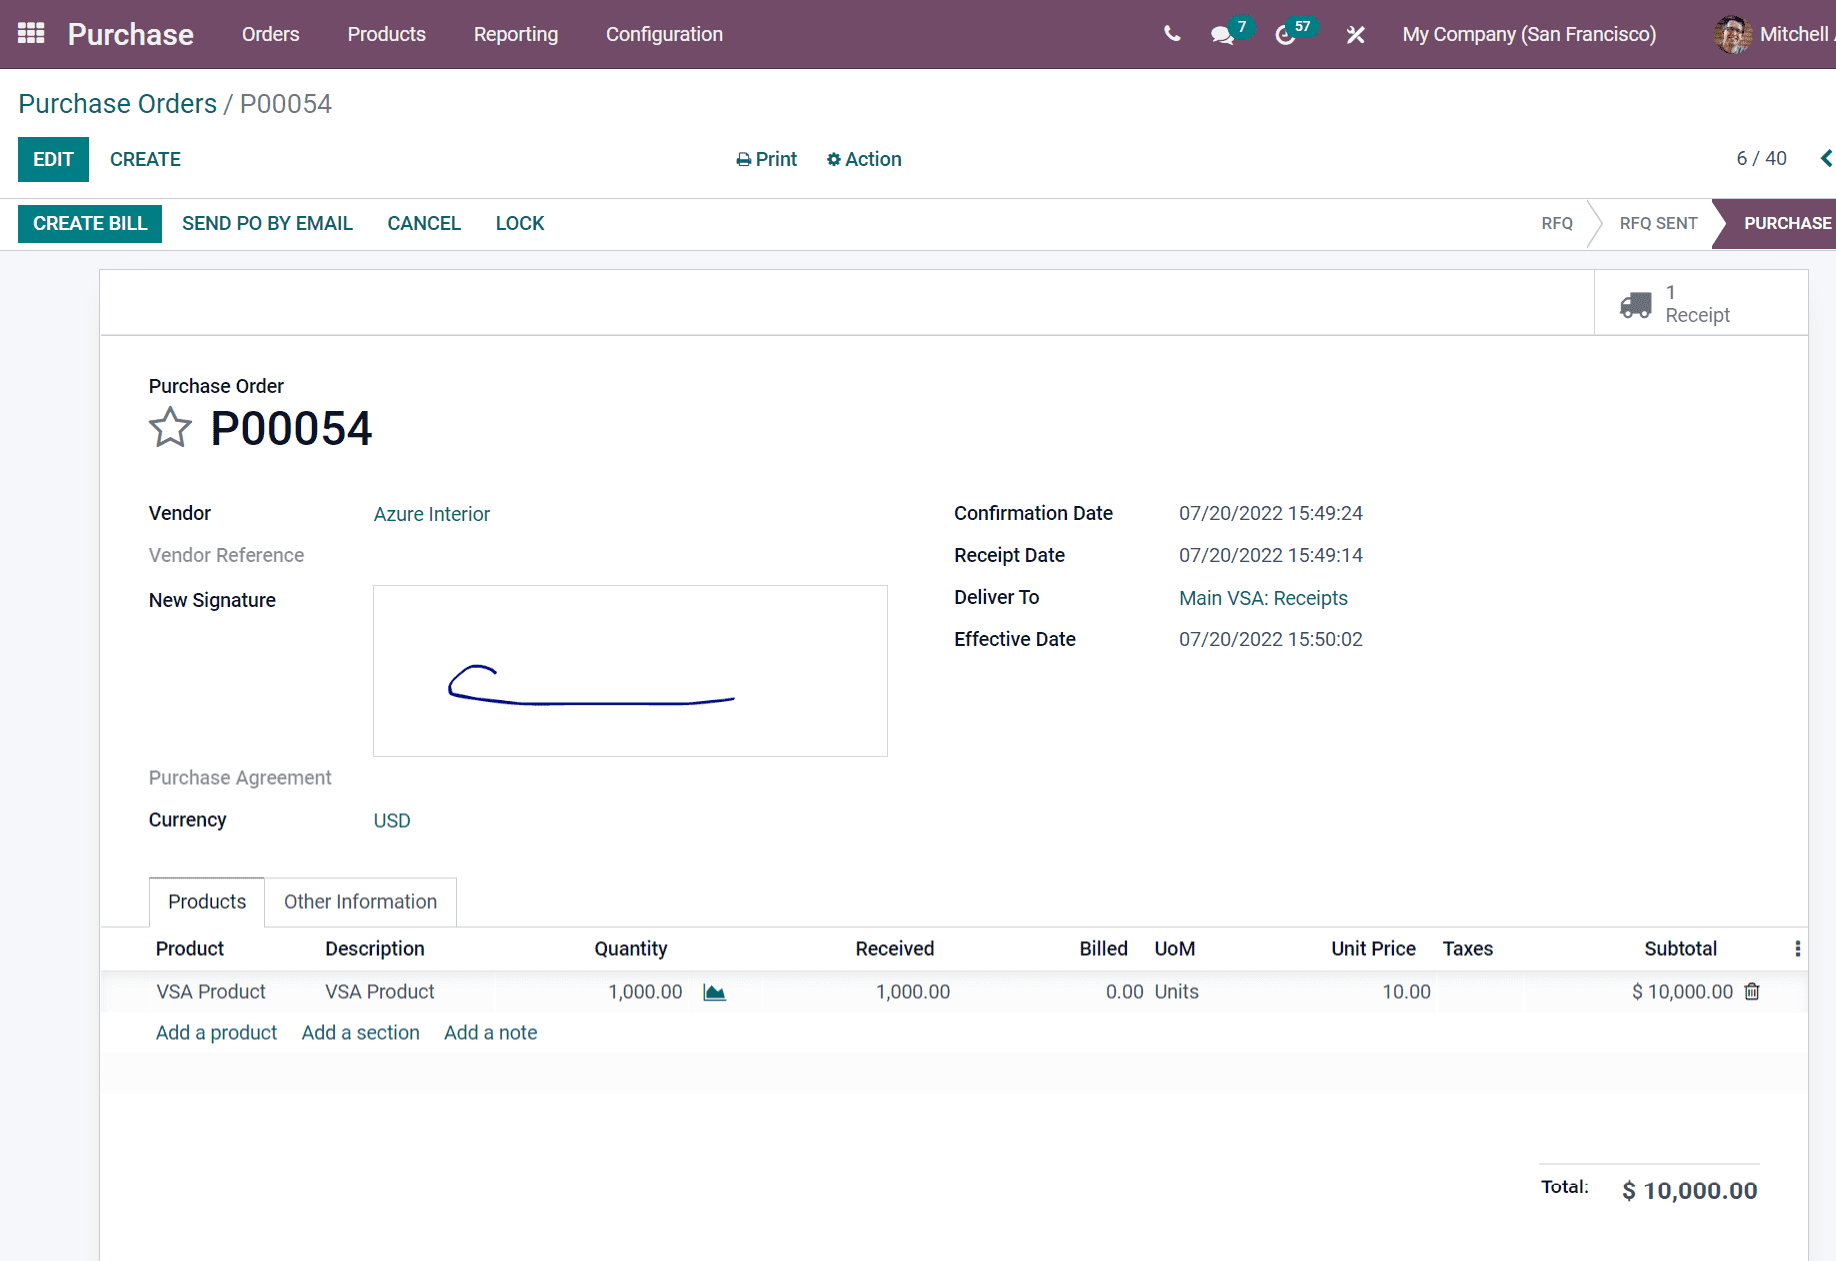 how-to-configure-lots-serial-numbers-product-traceability-in-odoo-15-cybrosys